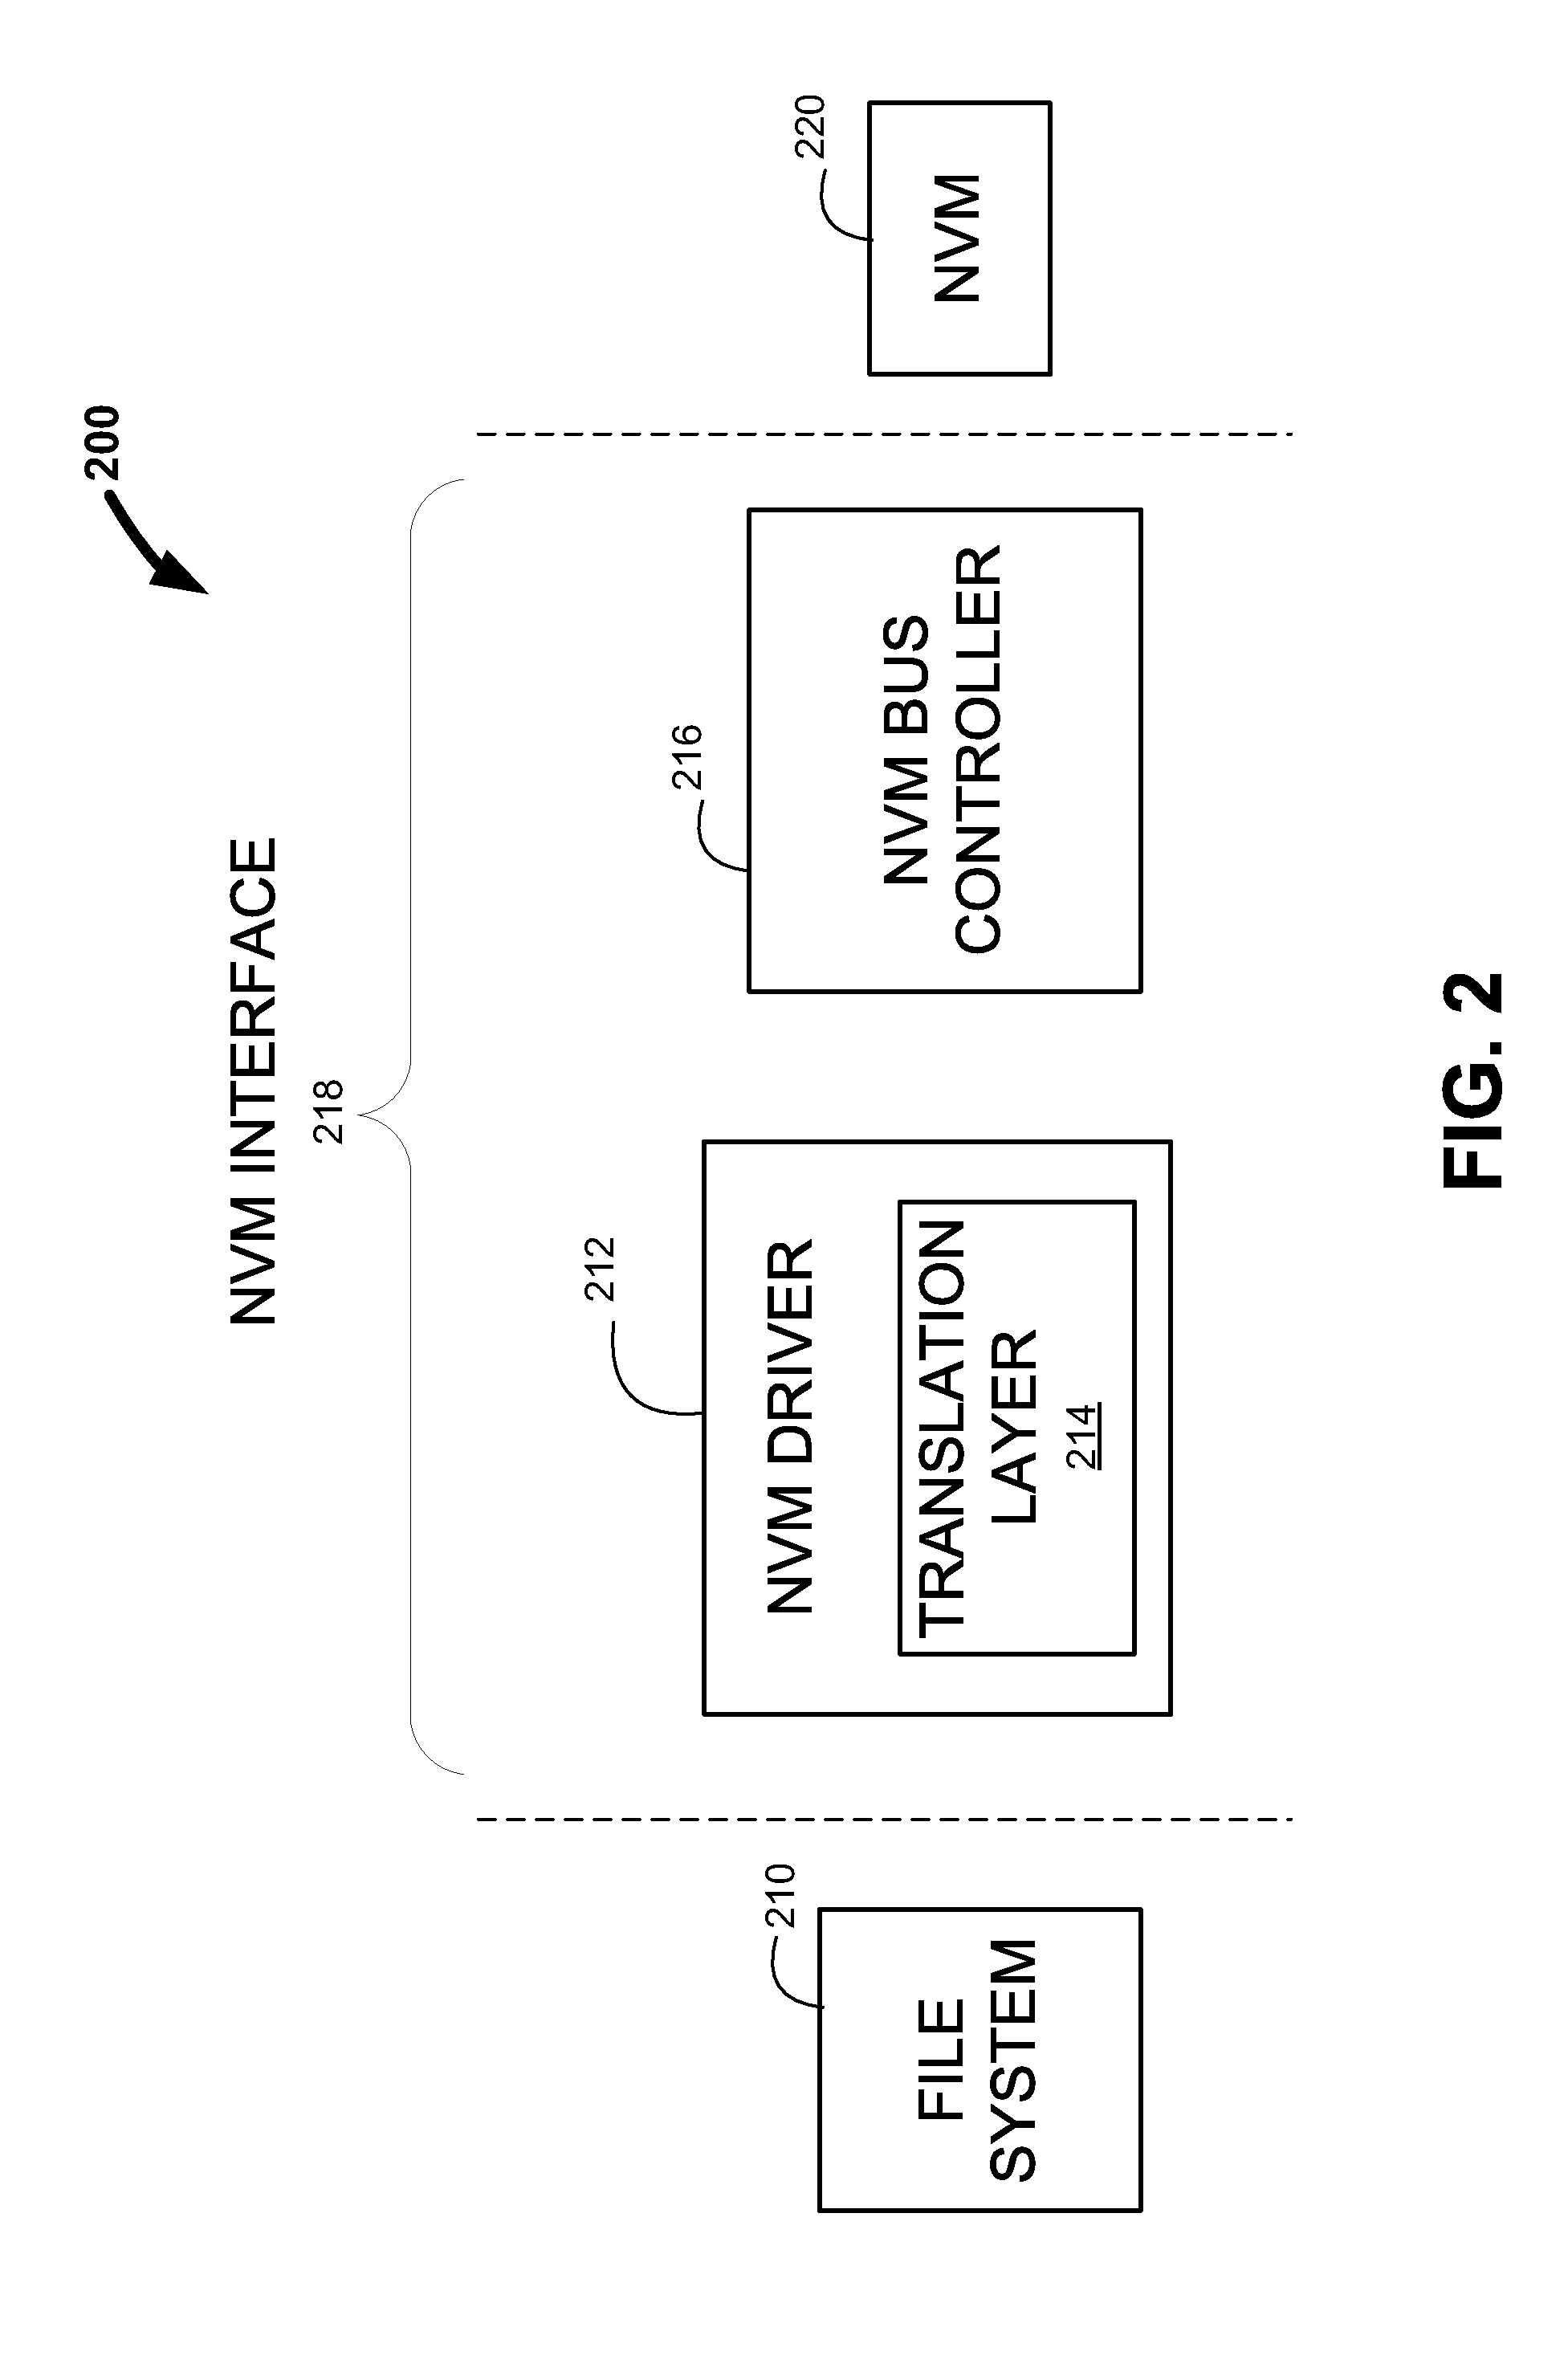 Dynamic allocation of power budget for a system having non-volatile memory